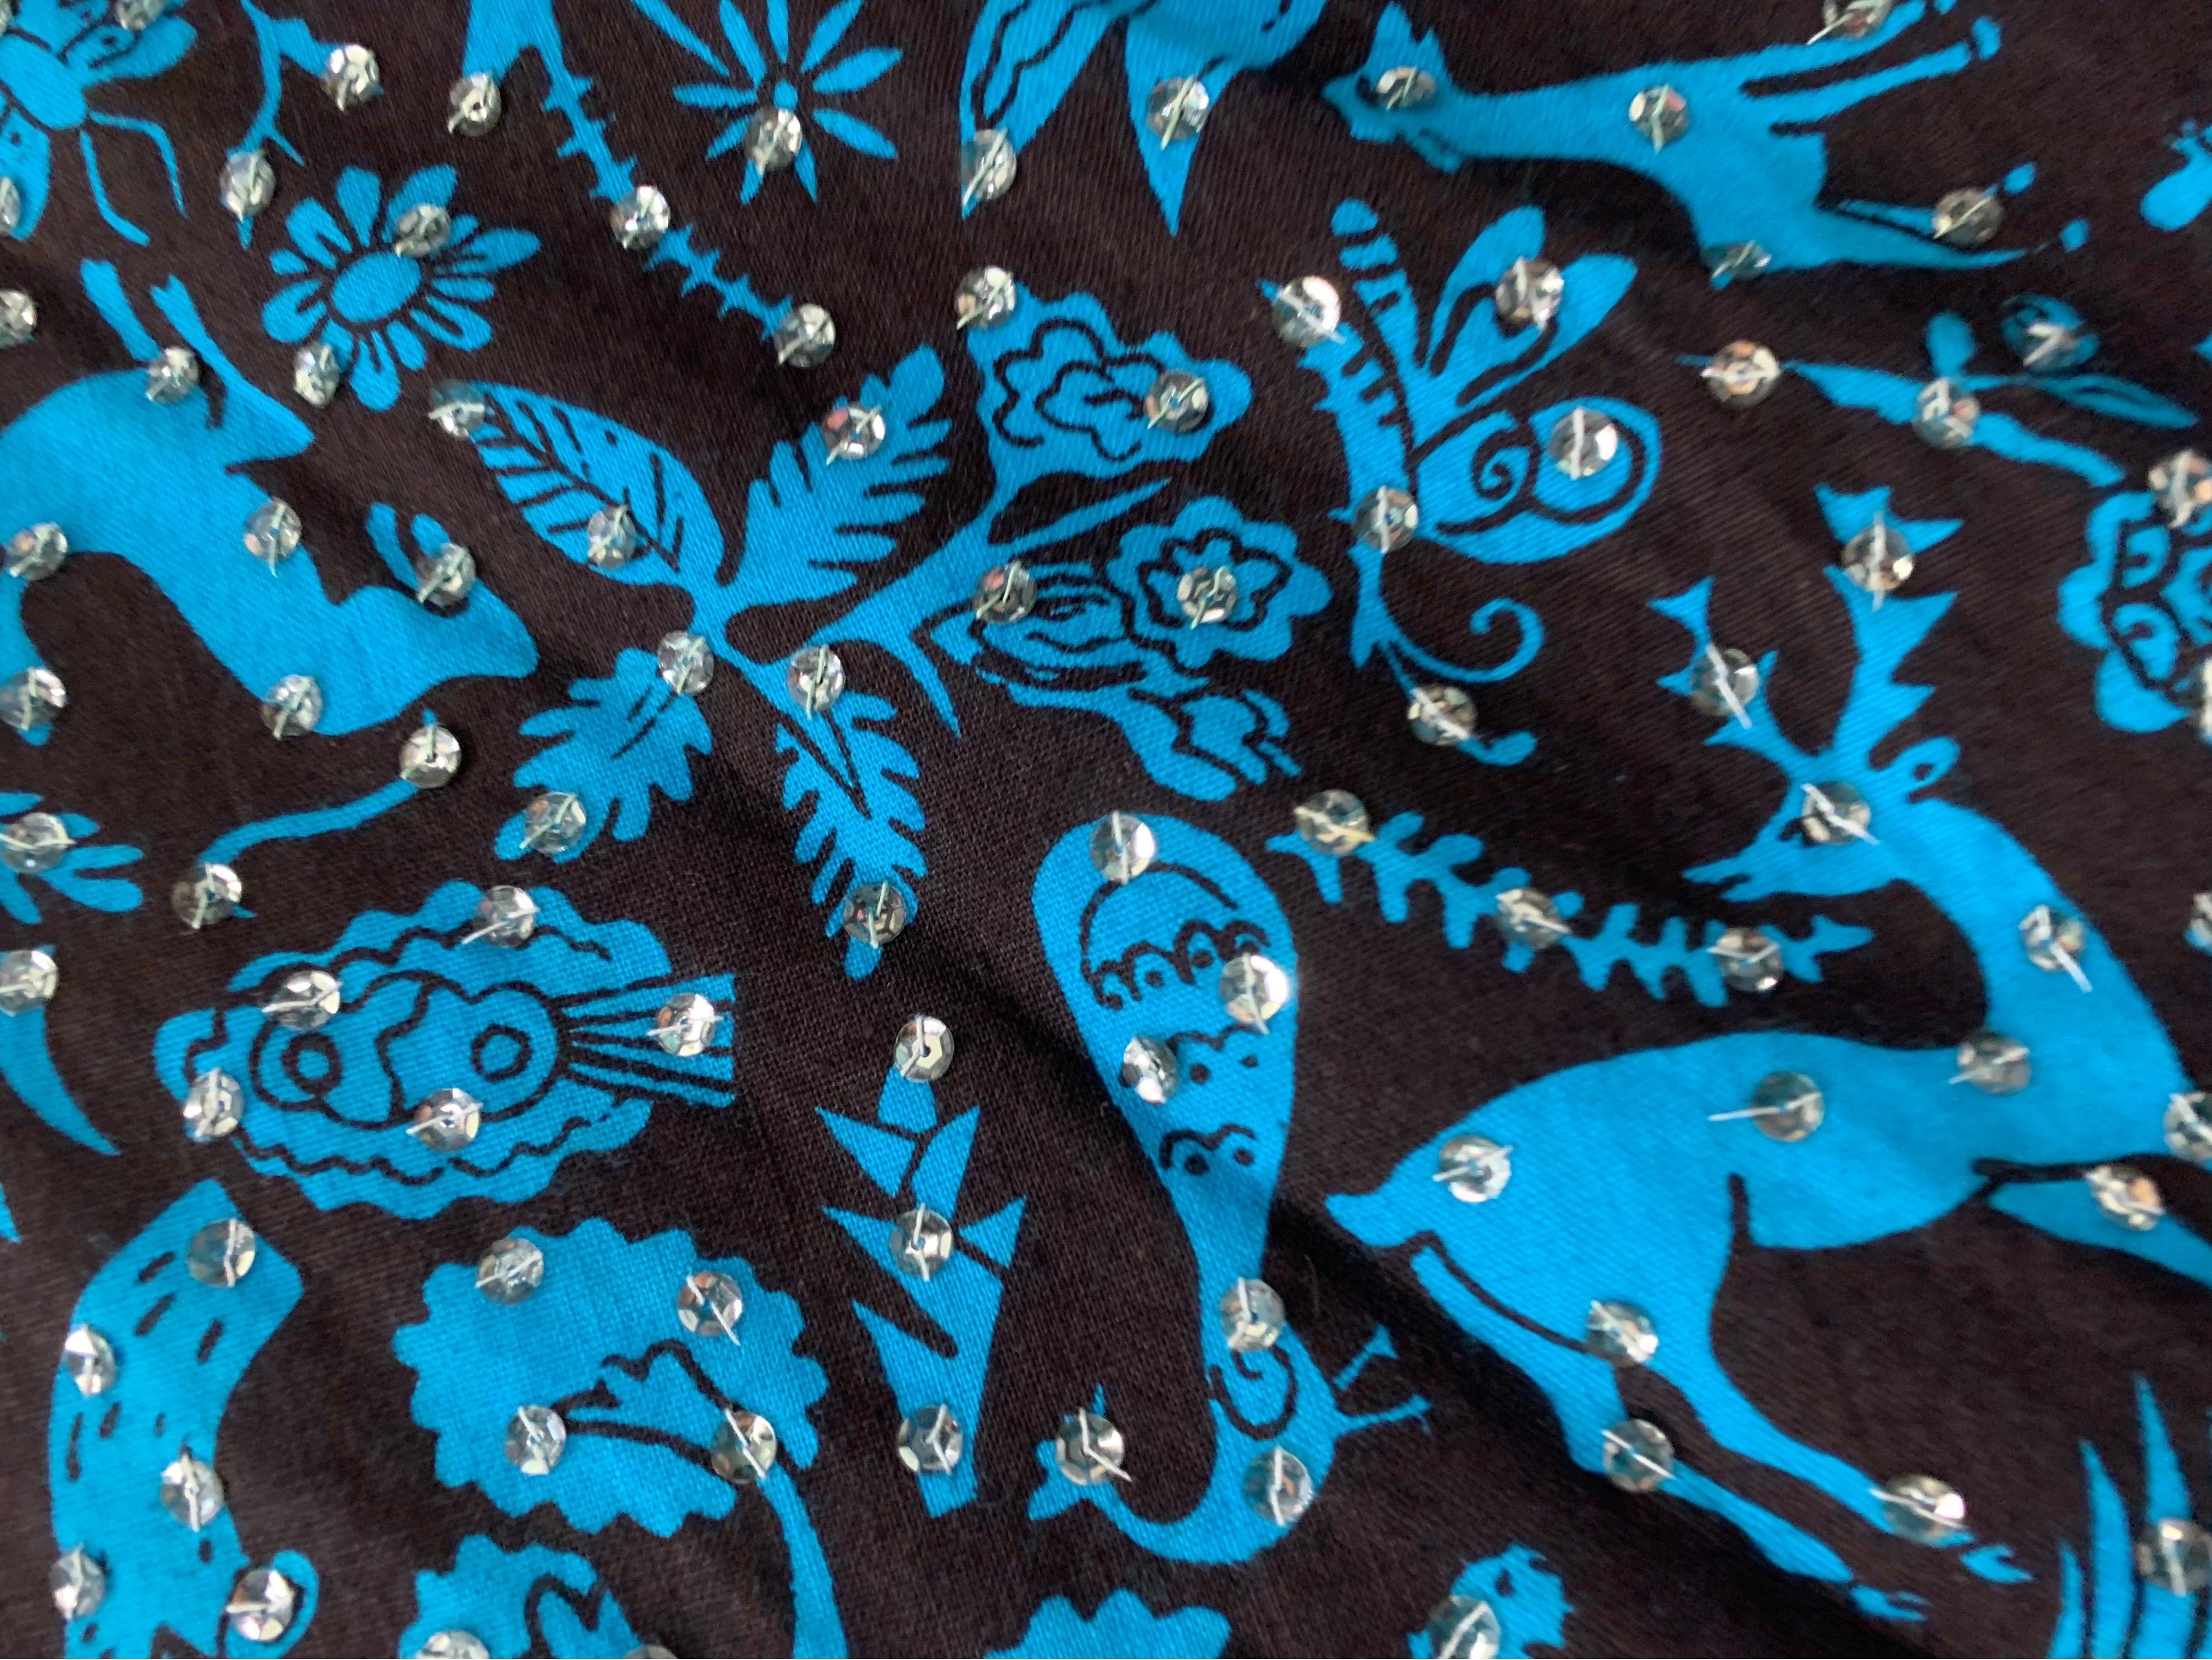 Women's 1950s Turquoise & Black Folkloric Print Cotton Summer Dress w/ Scattered Sequins For Sale